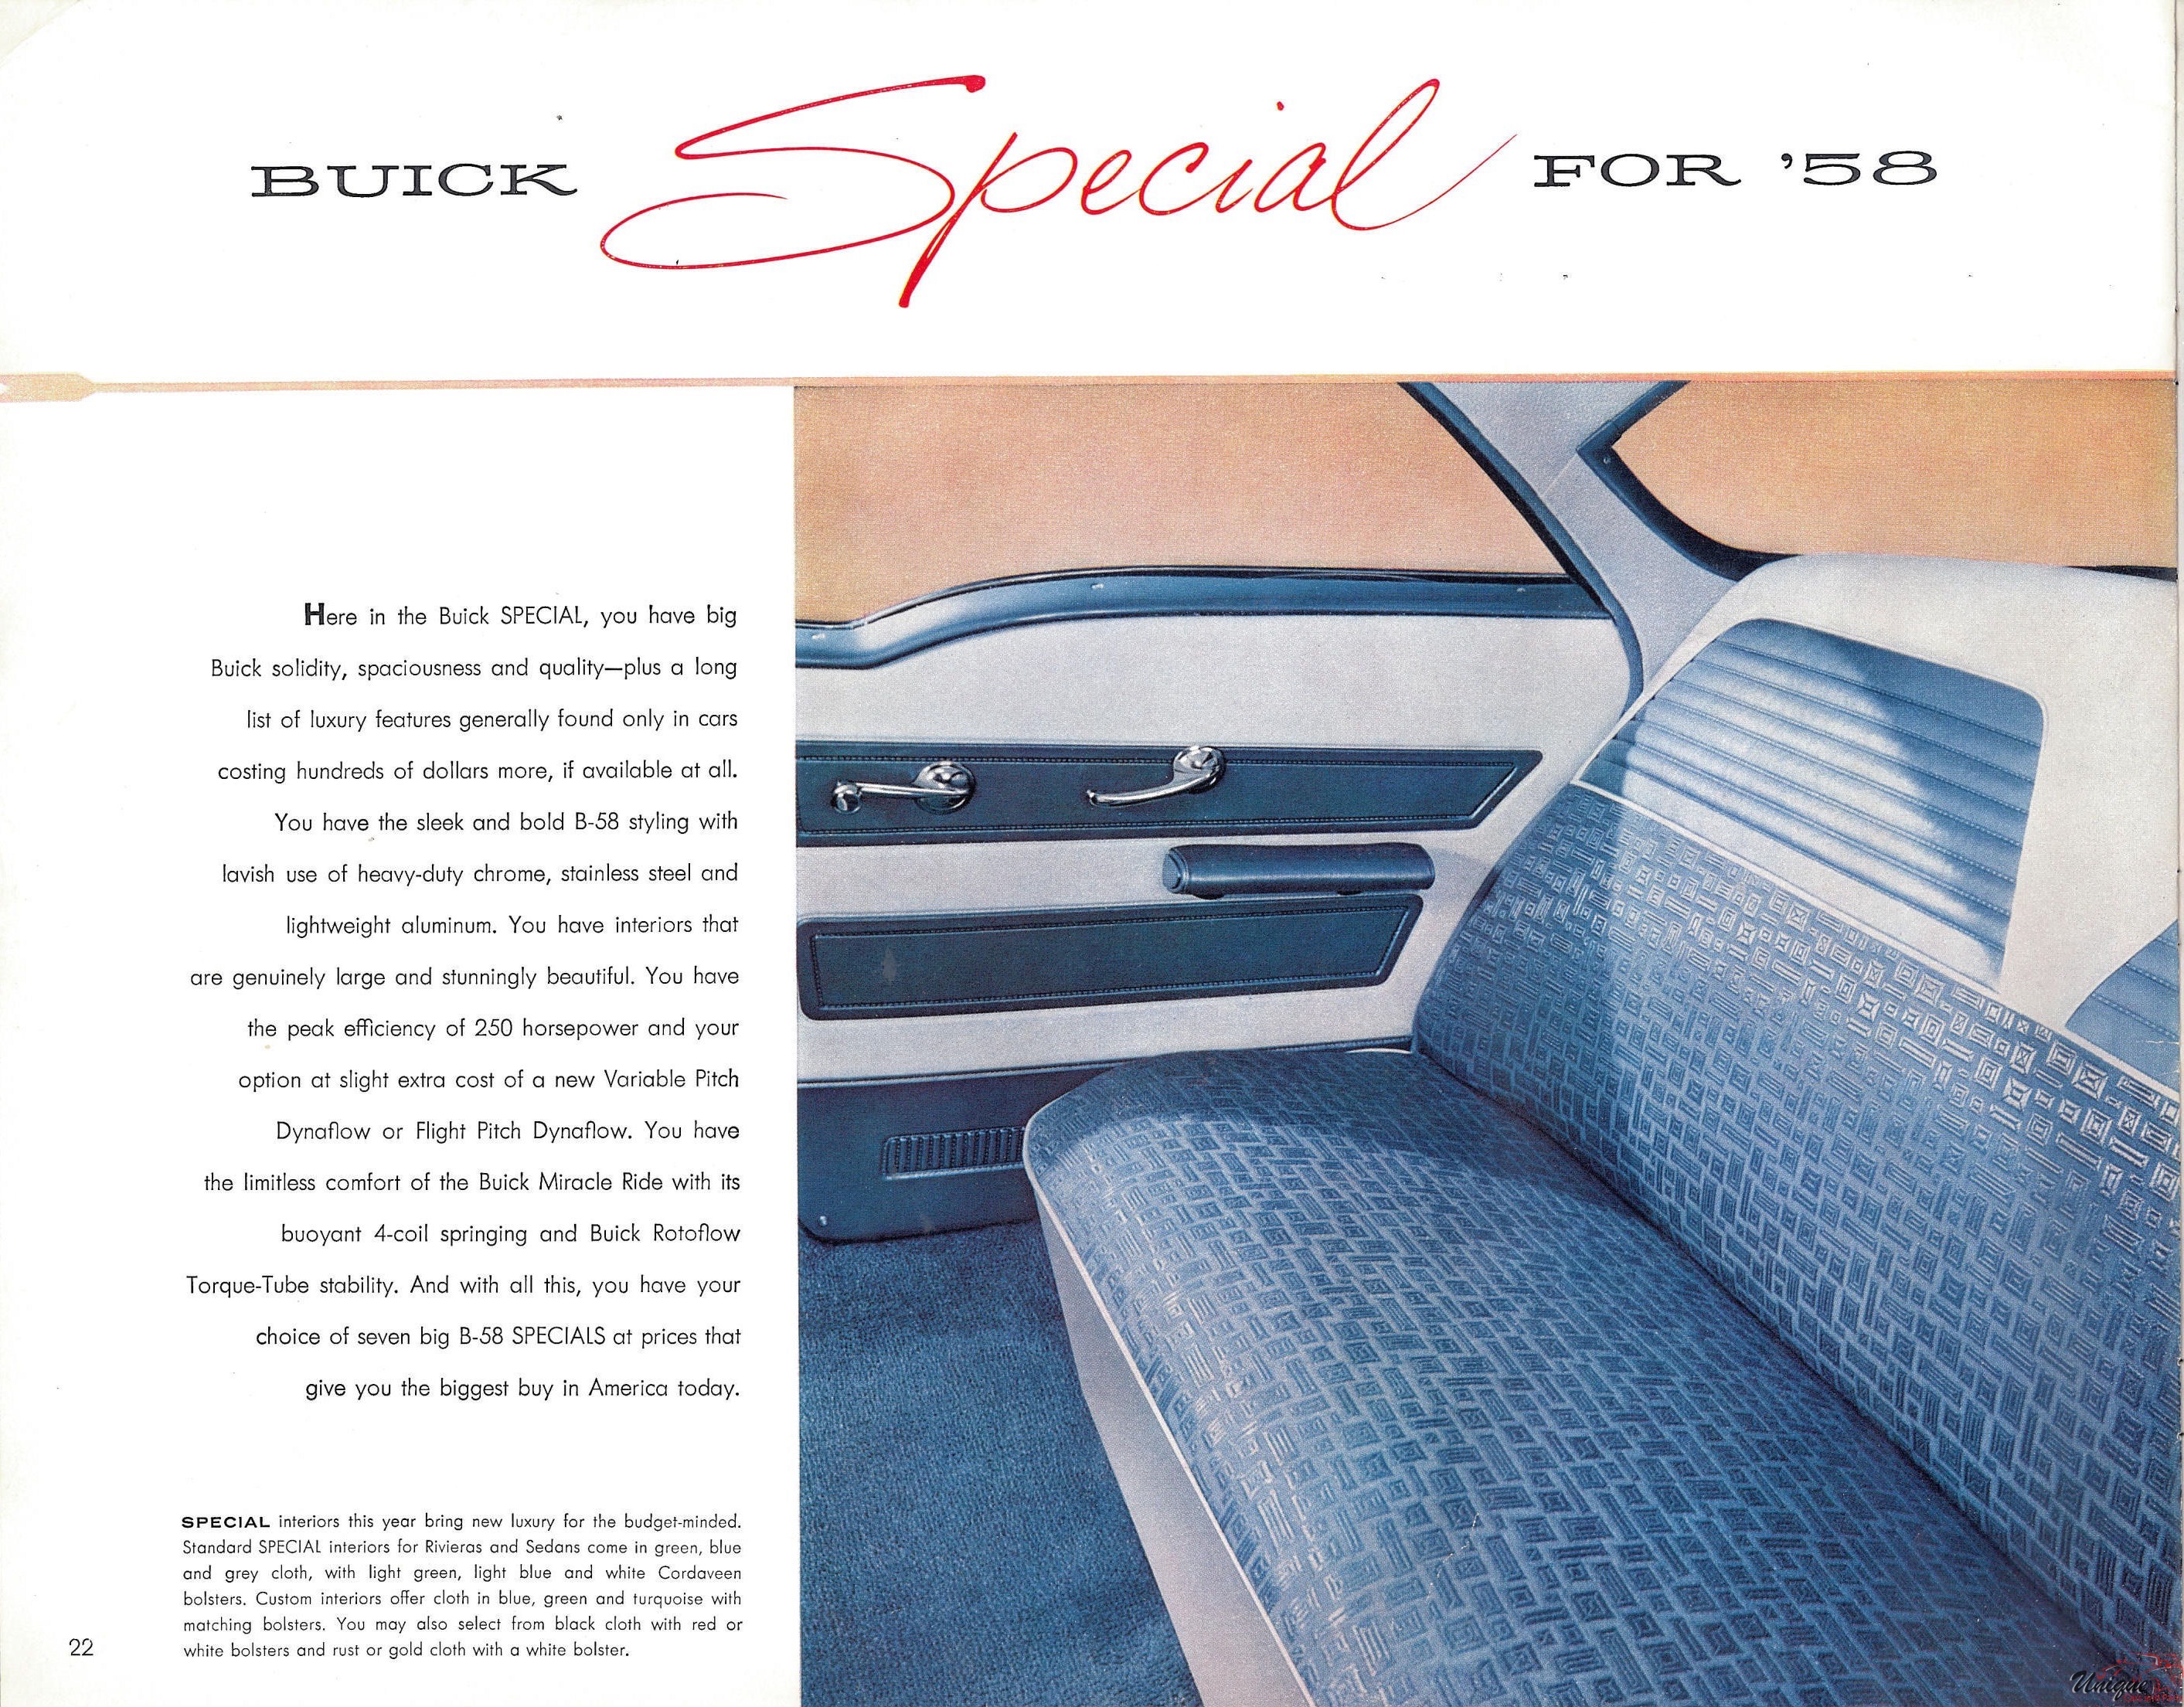 1958 Buick Brochure Page 14